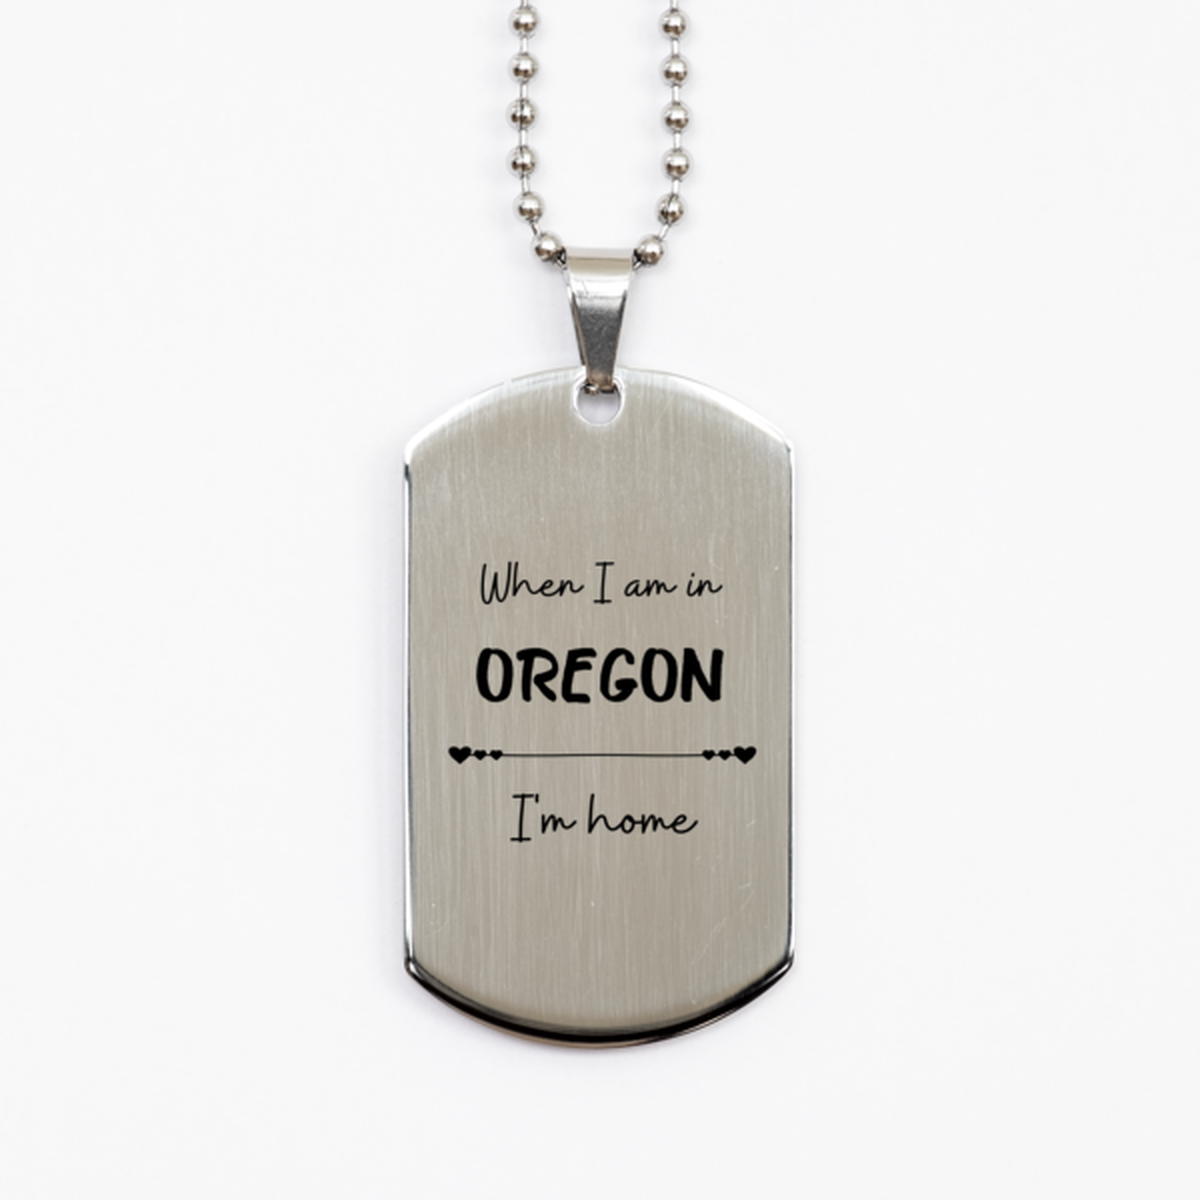 When I am in Oregon I'm home Silver Dog Tag, Cheap Gifts For Oregon, State Oregon Birthday Gifts for Friends Coworker